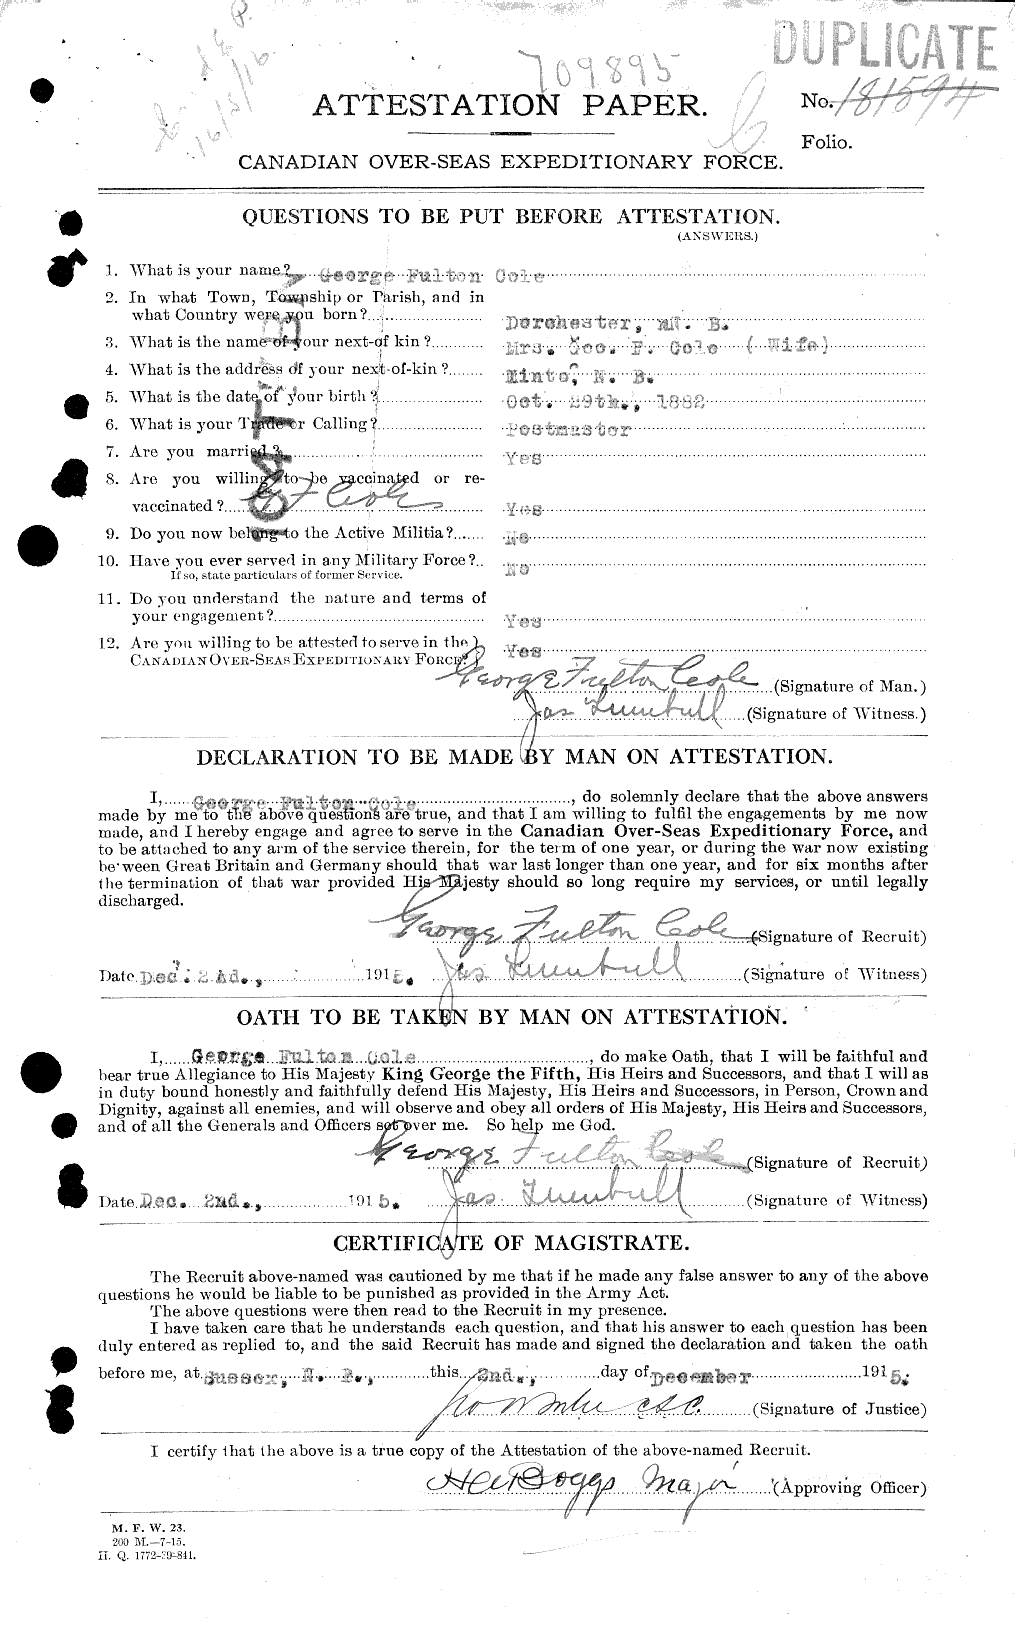 Personnel Records of the First World War - CEF 027765a